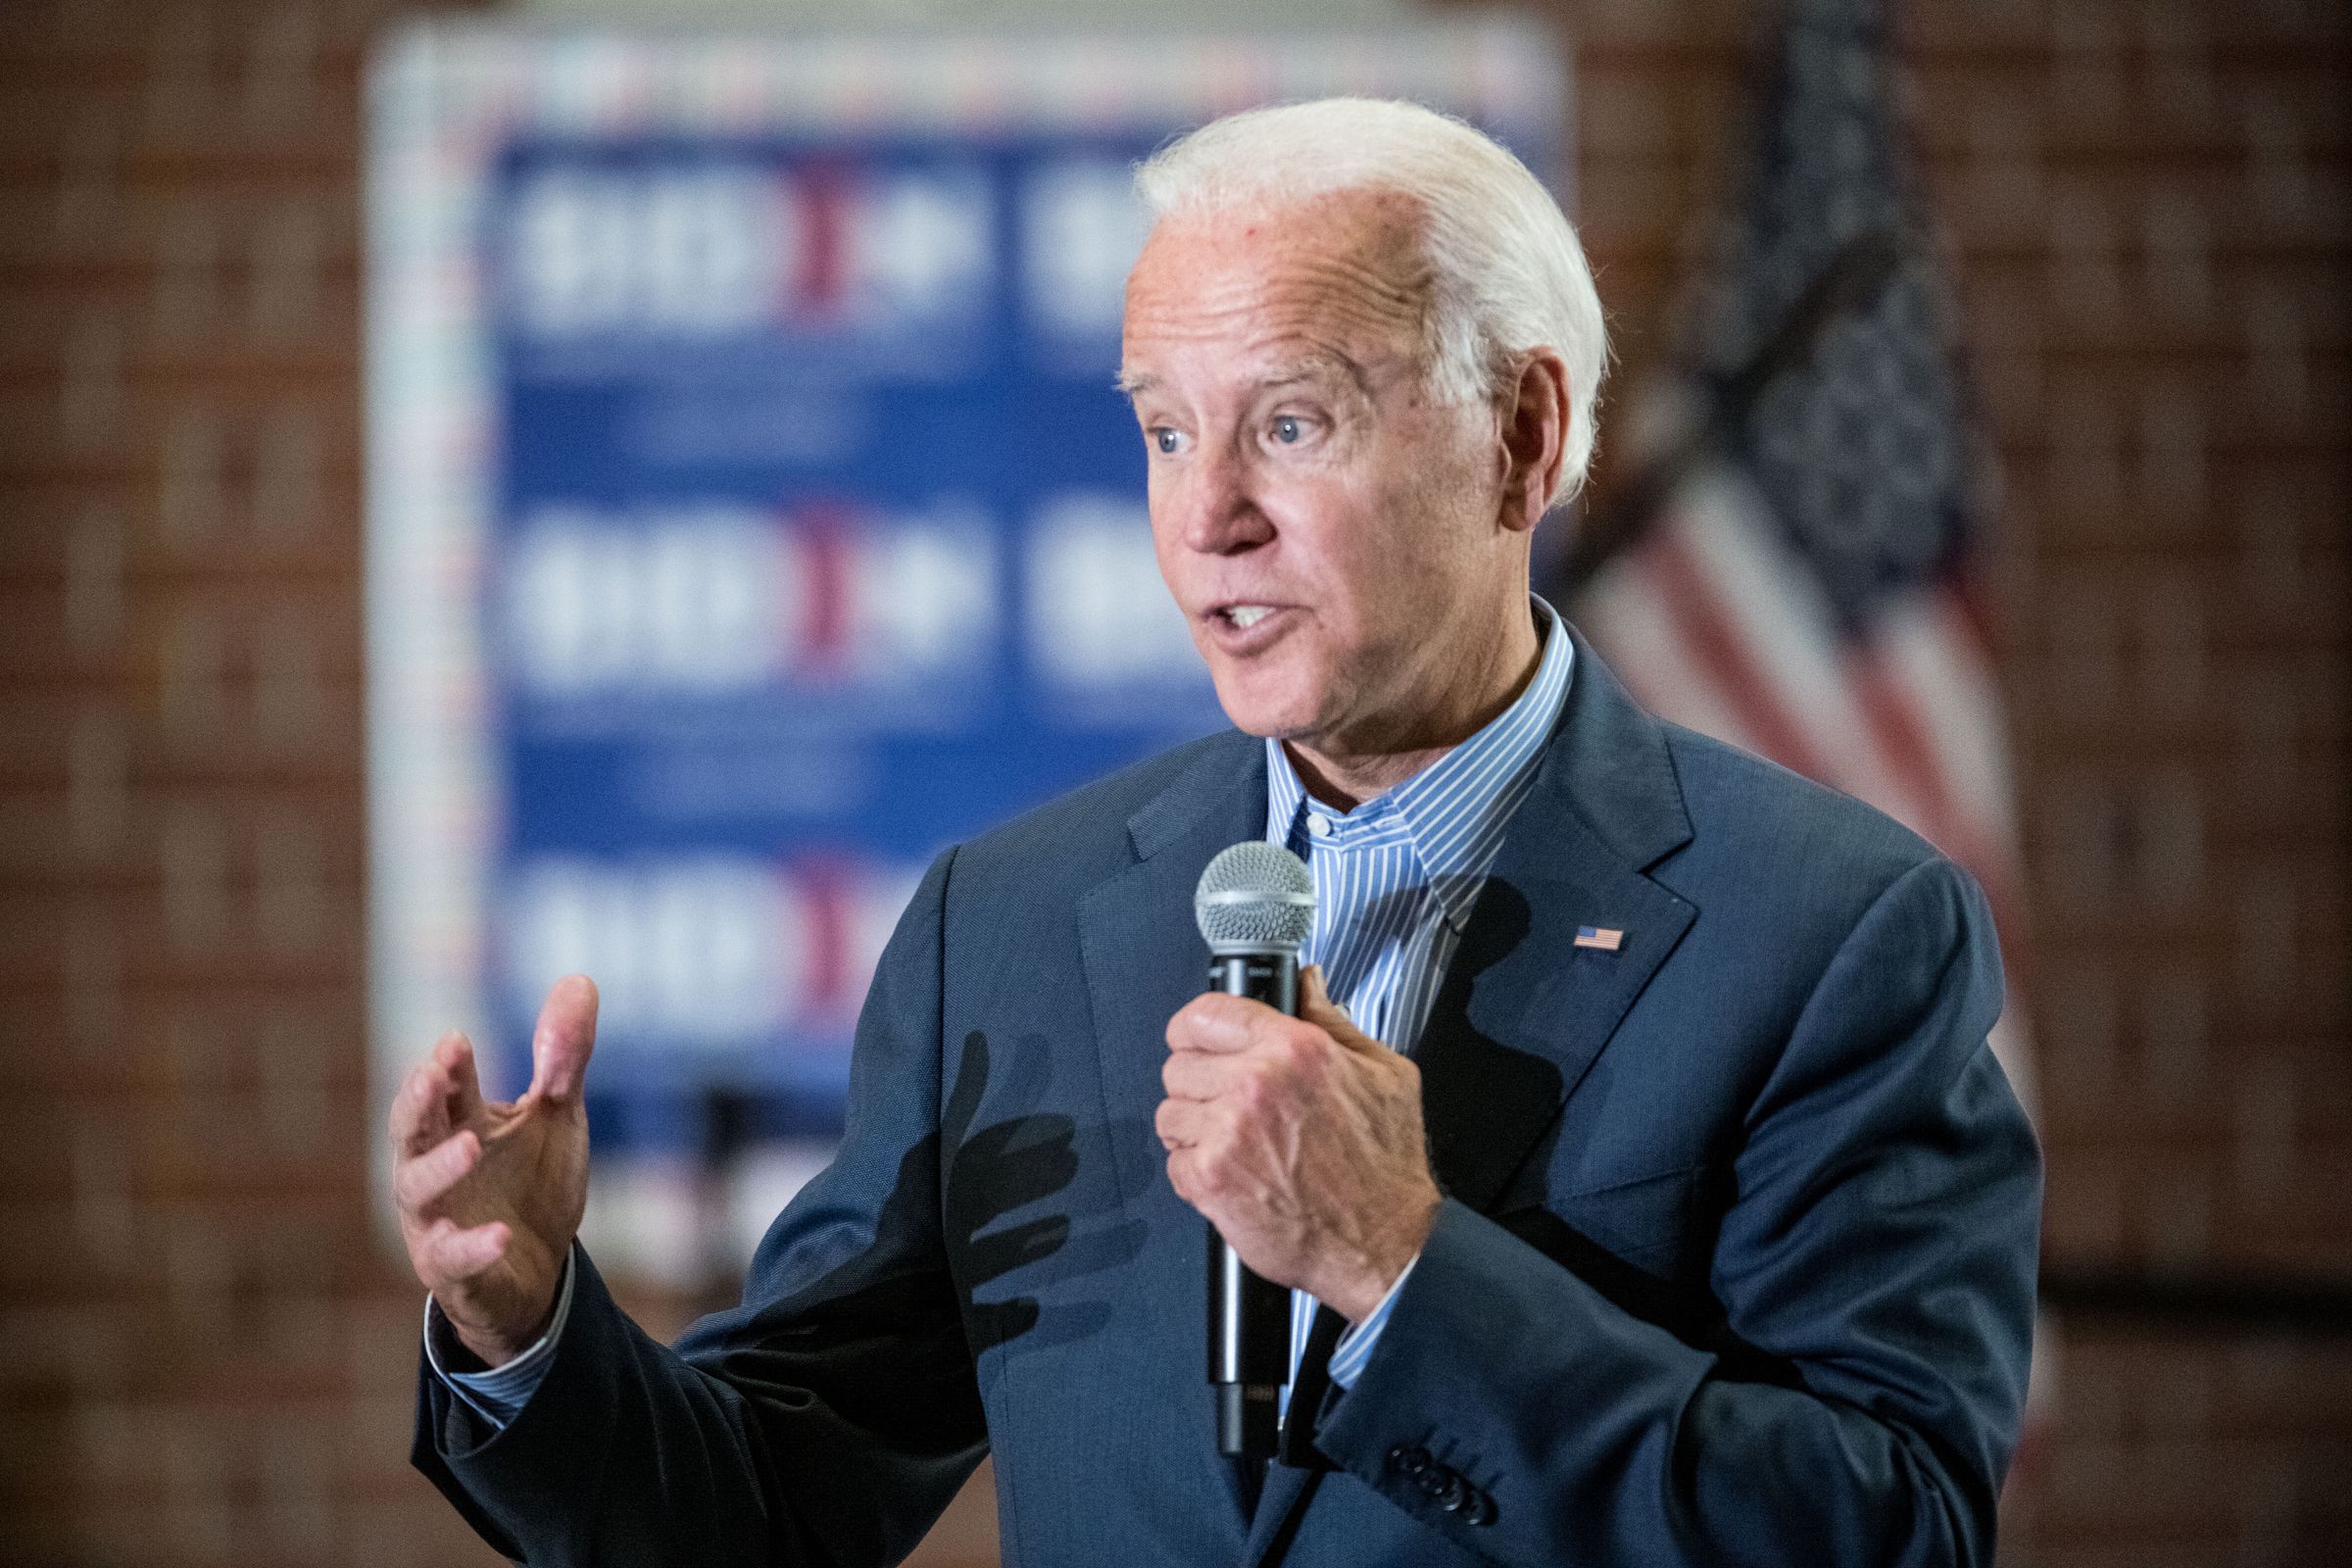 Presidential Candidate Joe Biden Holds A Town Hall In South Carolina